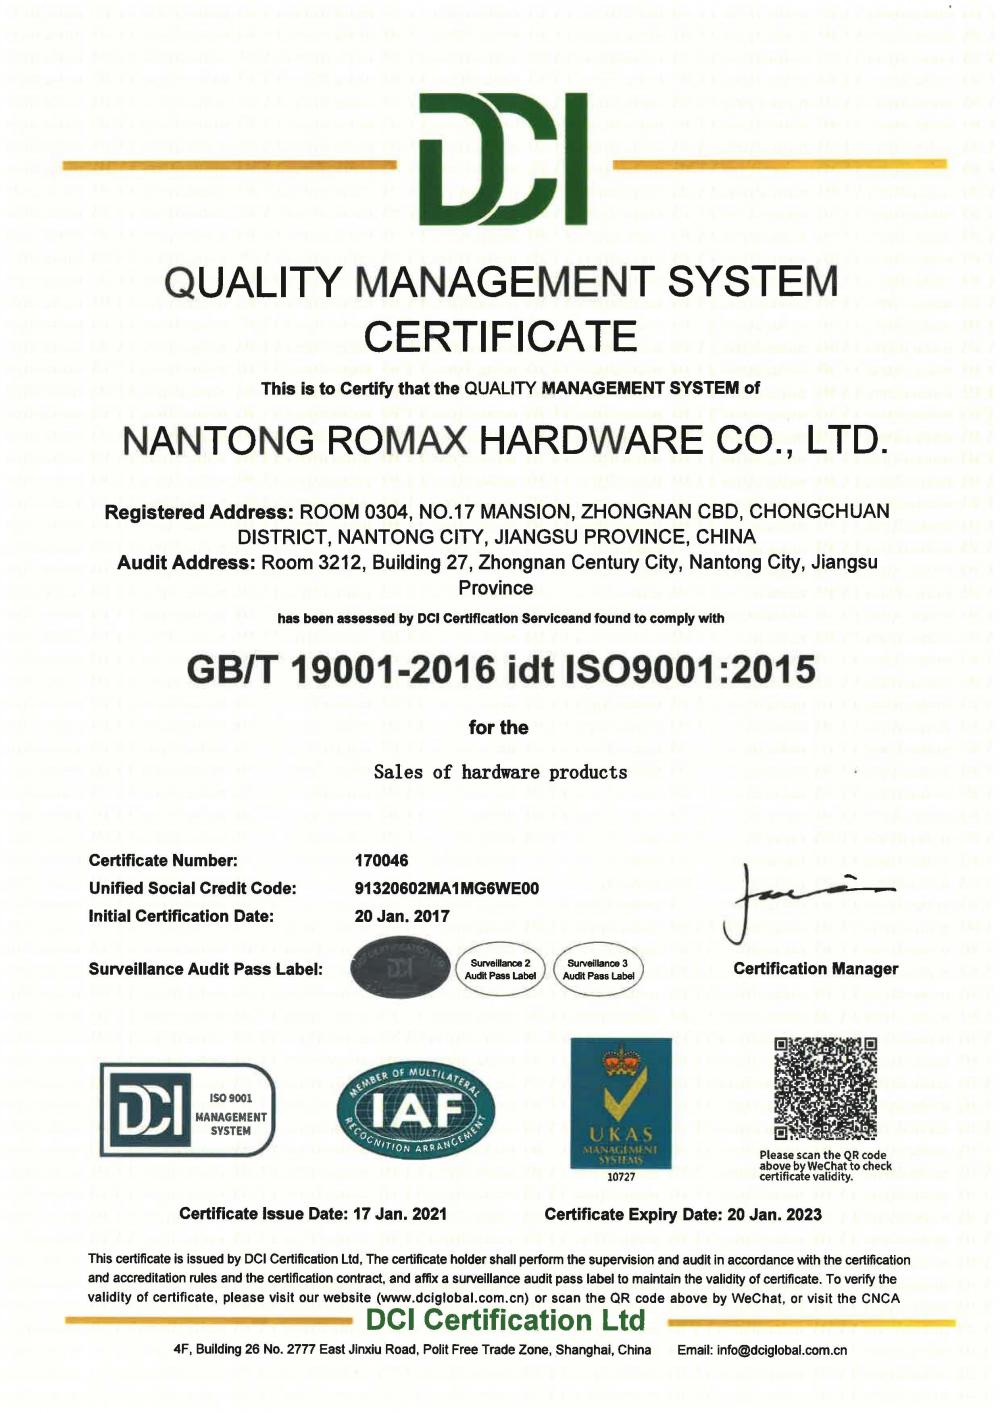 QUALITY MANAGEMENT SYSTEM CERTIFICATE